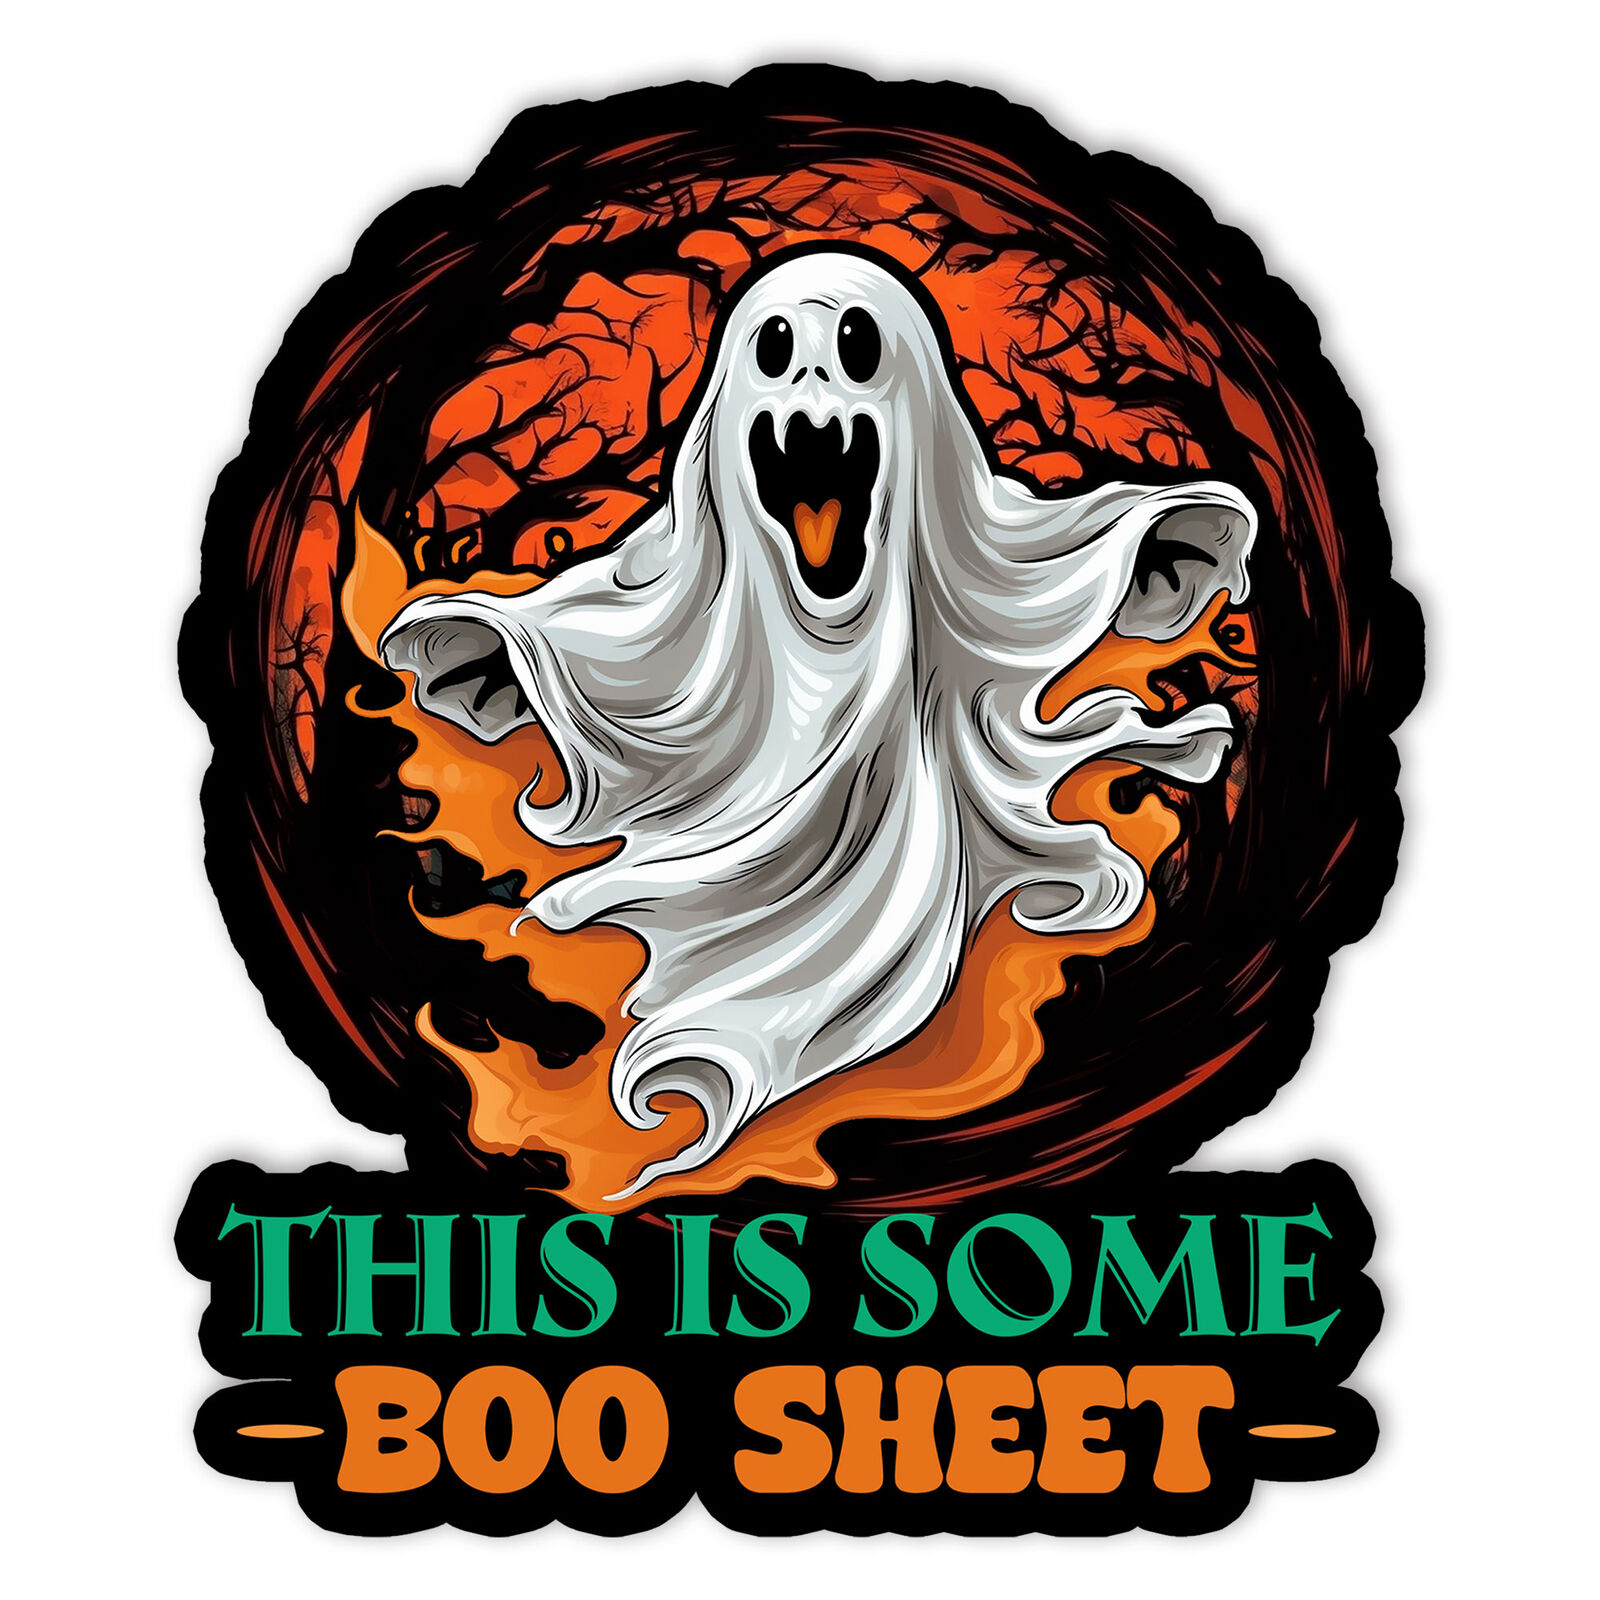 This Is Some Boo Sheet Funny Scary Ghost Horror Halloween Vinyl Sticker 5in